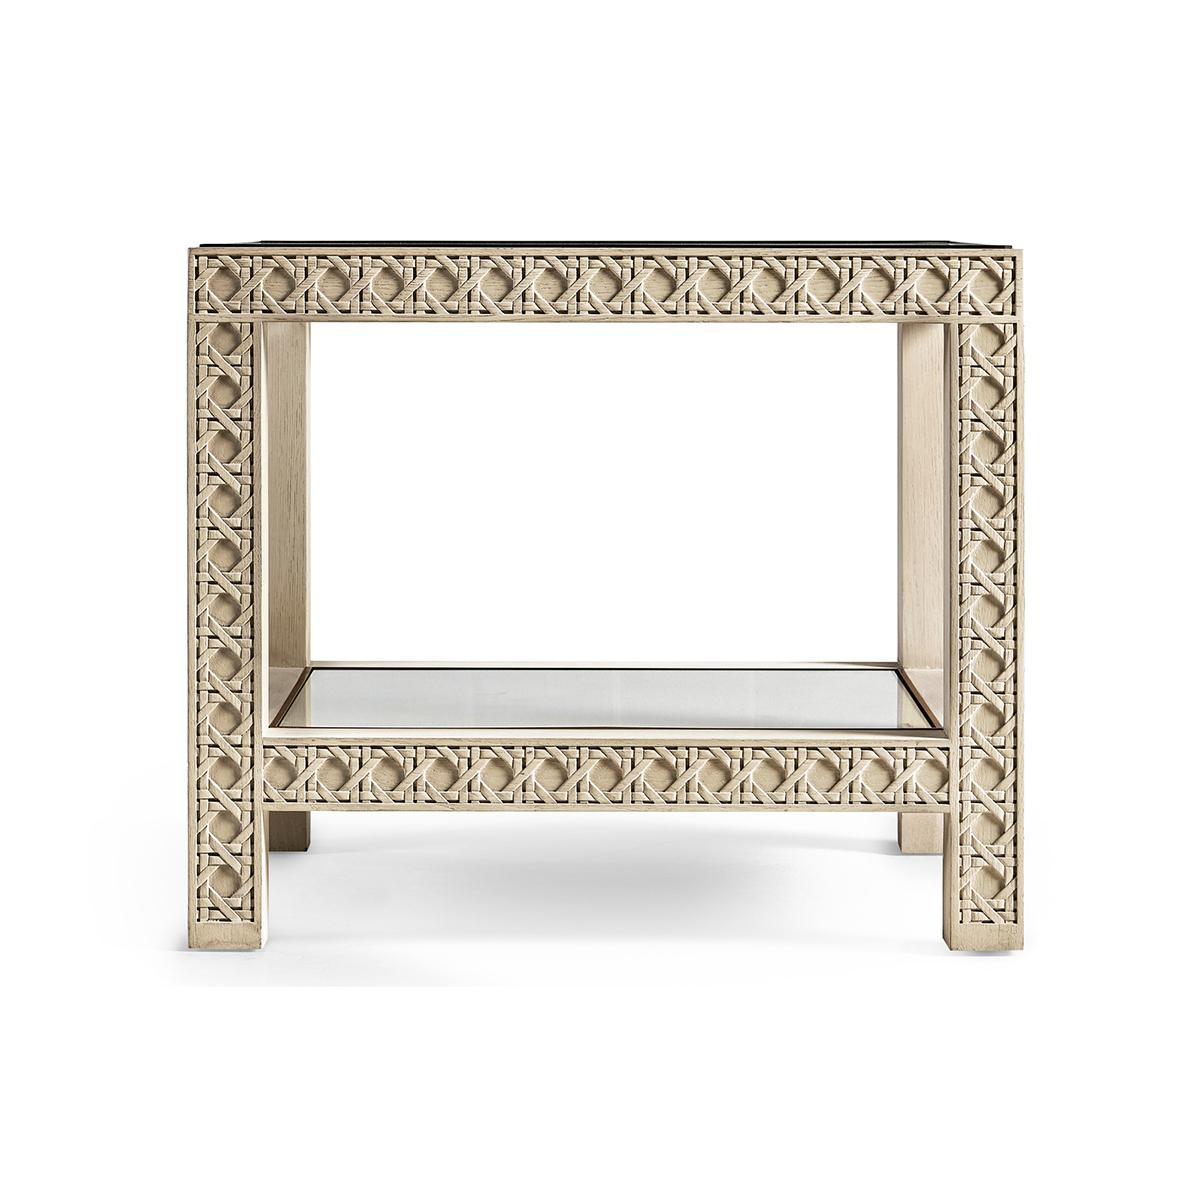 White washed oak end table, featuring a digitally carved, traditional woven cane design, the table boasts mesmerizing textural layers. White-washed oak with stunning grain detail is paired flawlessly with a polished glass top and linen, glass-topped